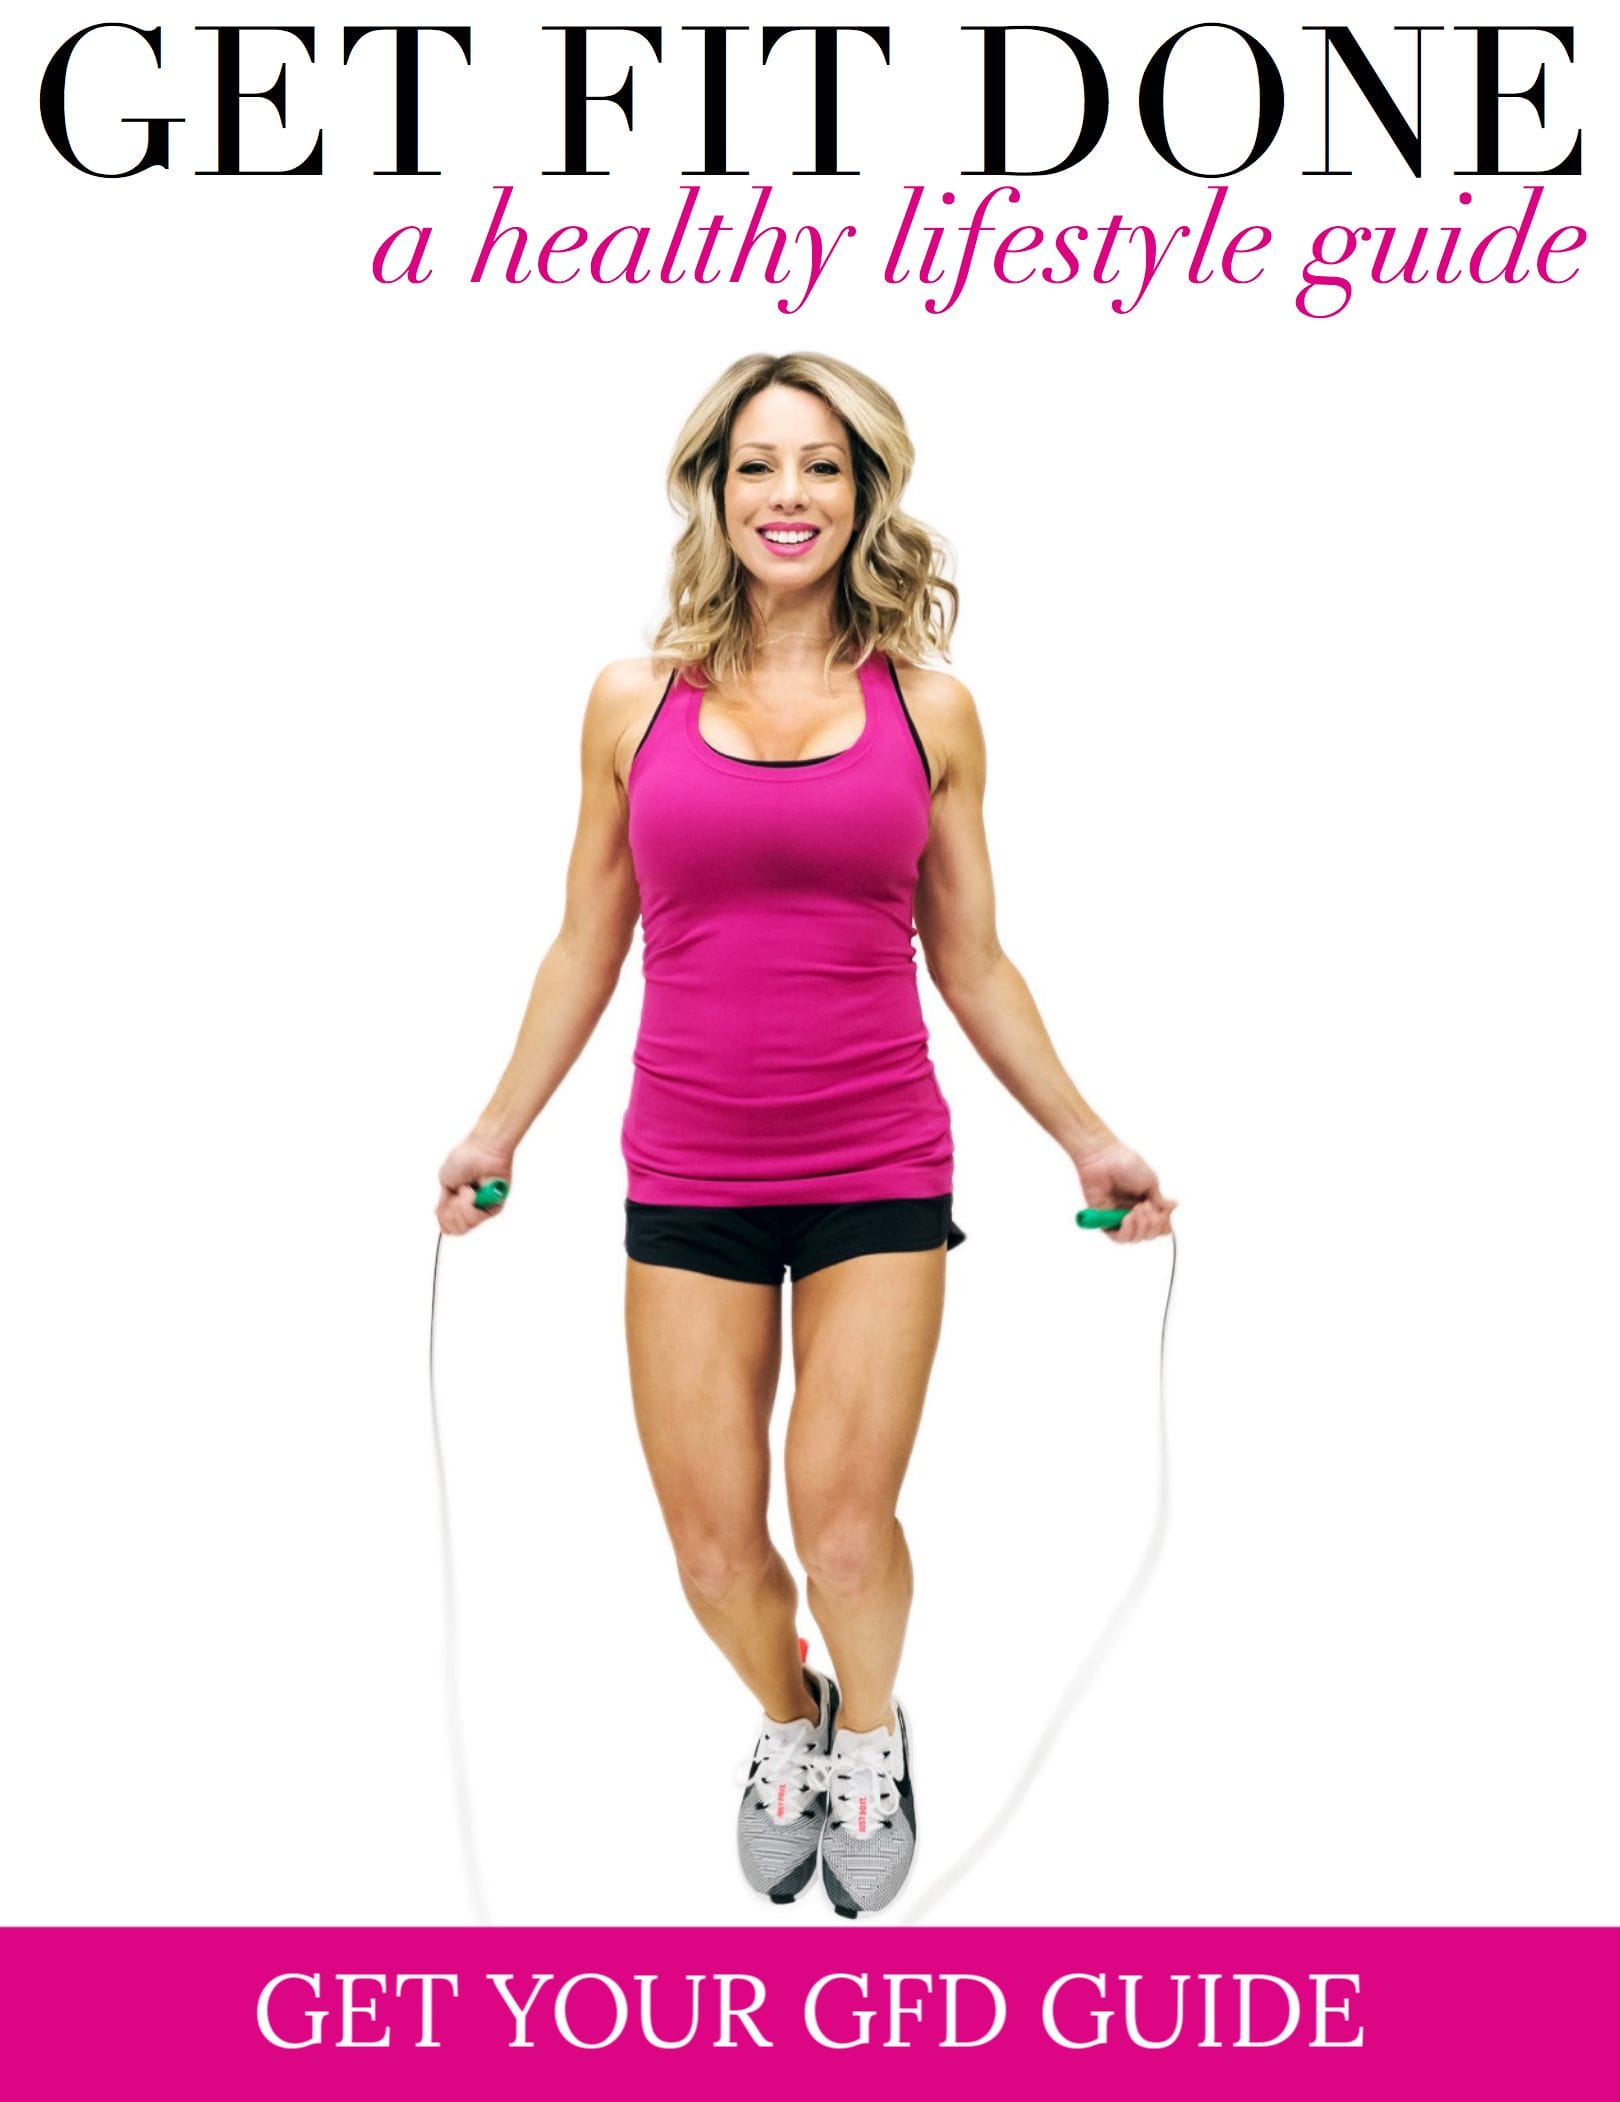 GET FIT DONE | A HEALTHY LIFESTYLE GUIDE IS AVAILABLE TODAY